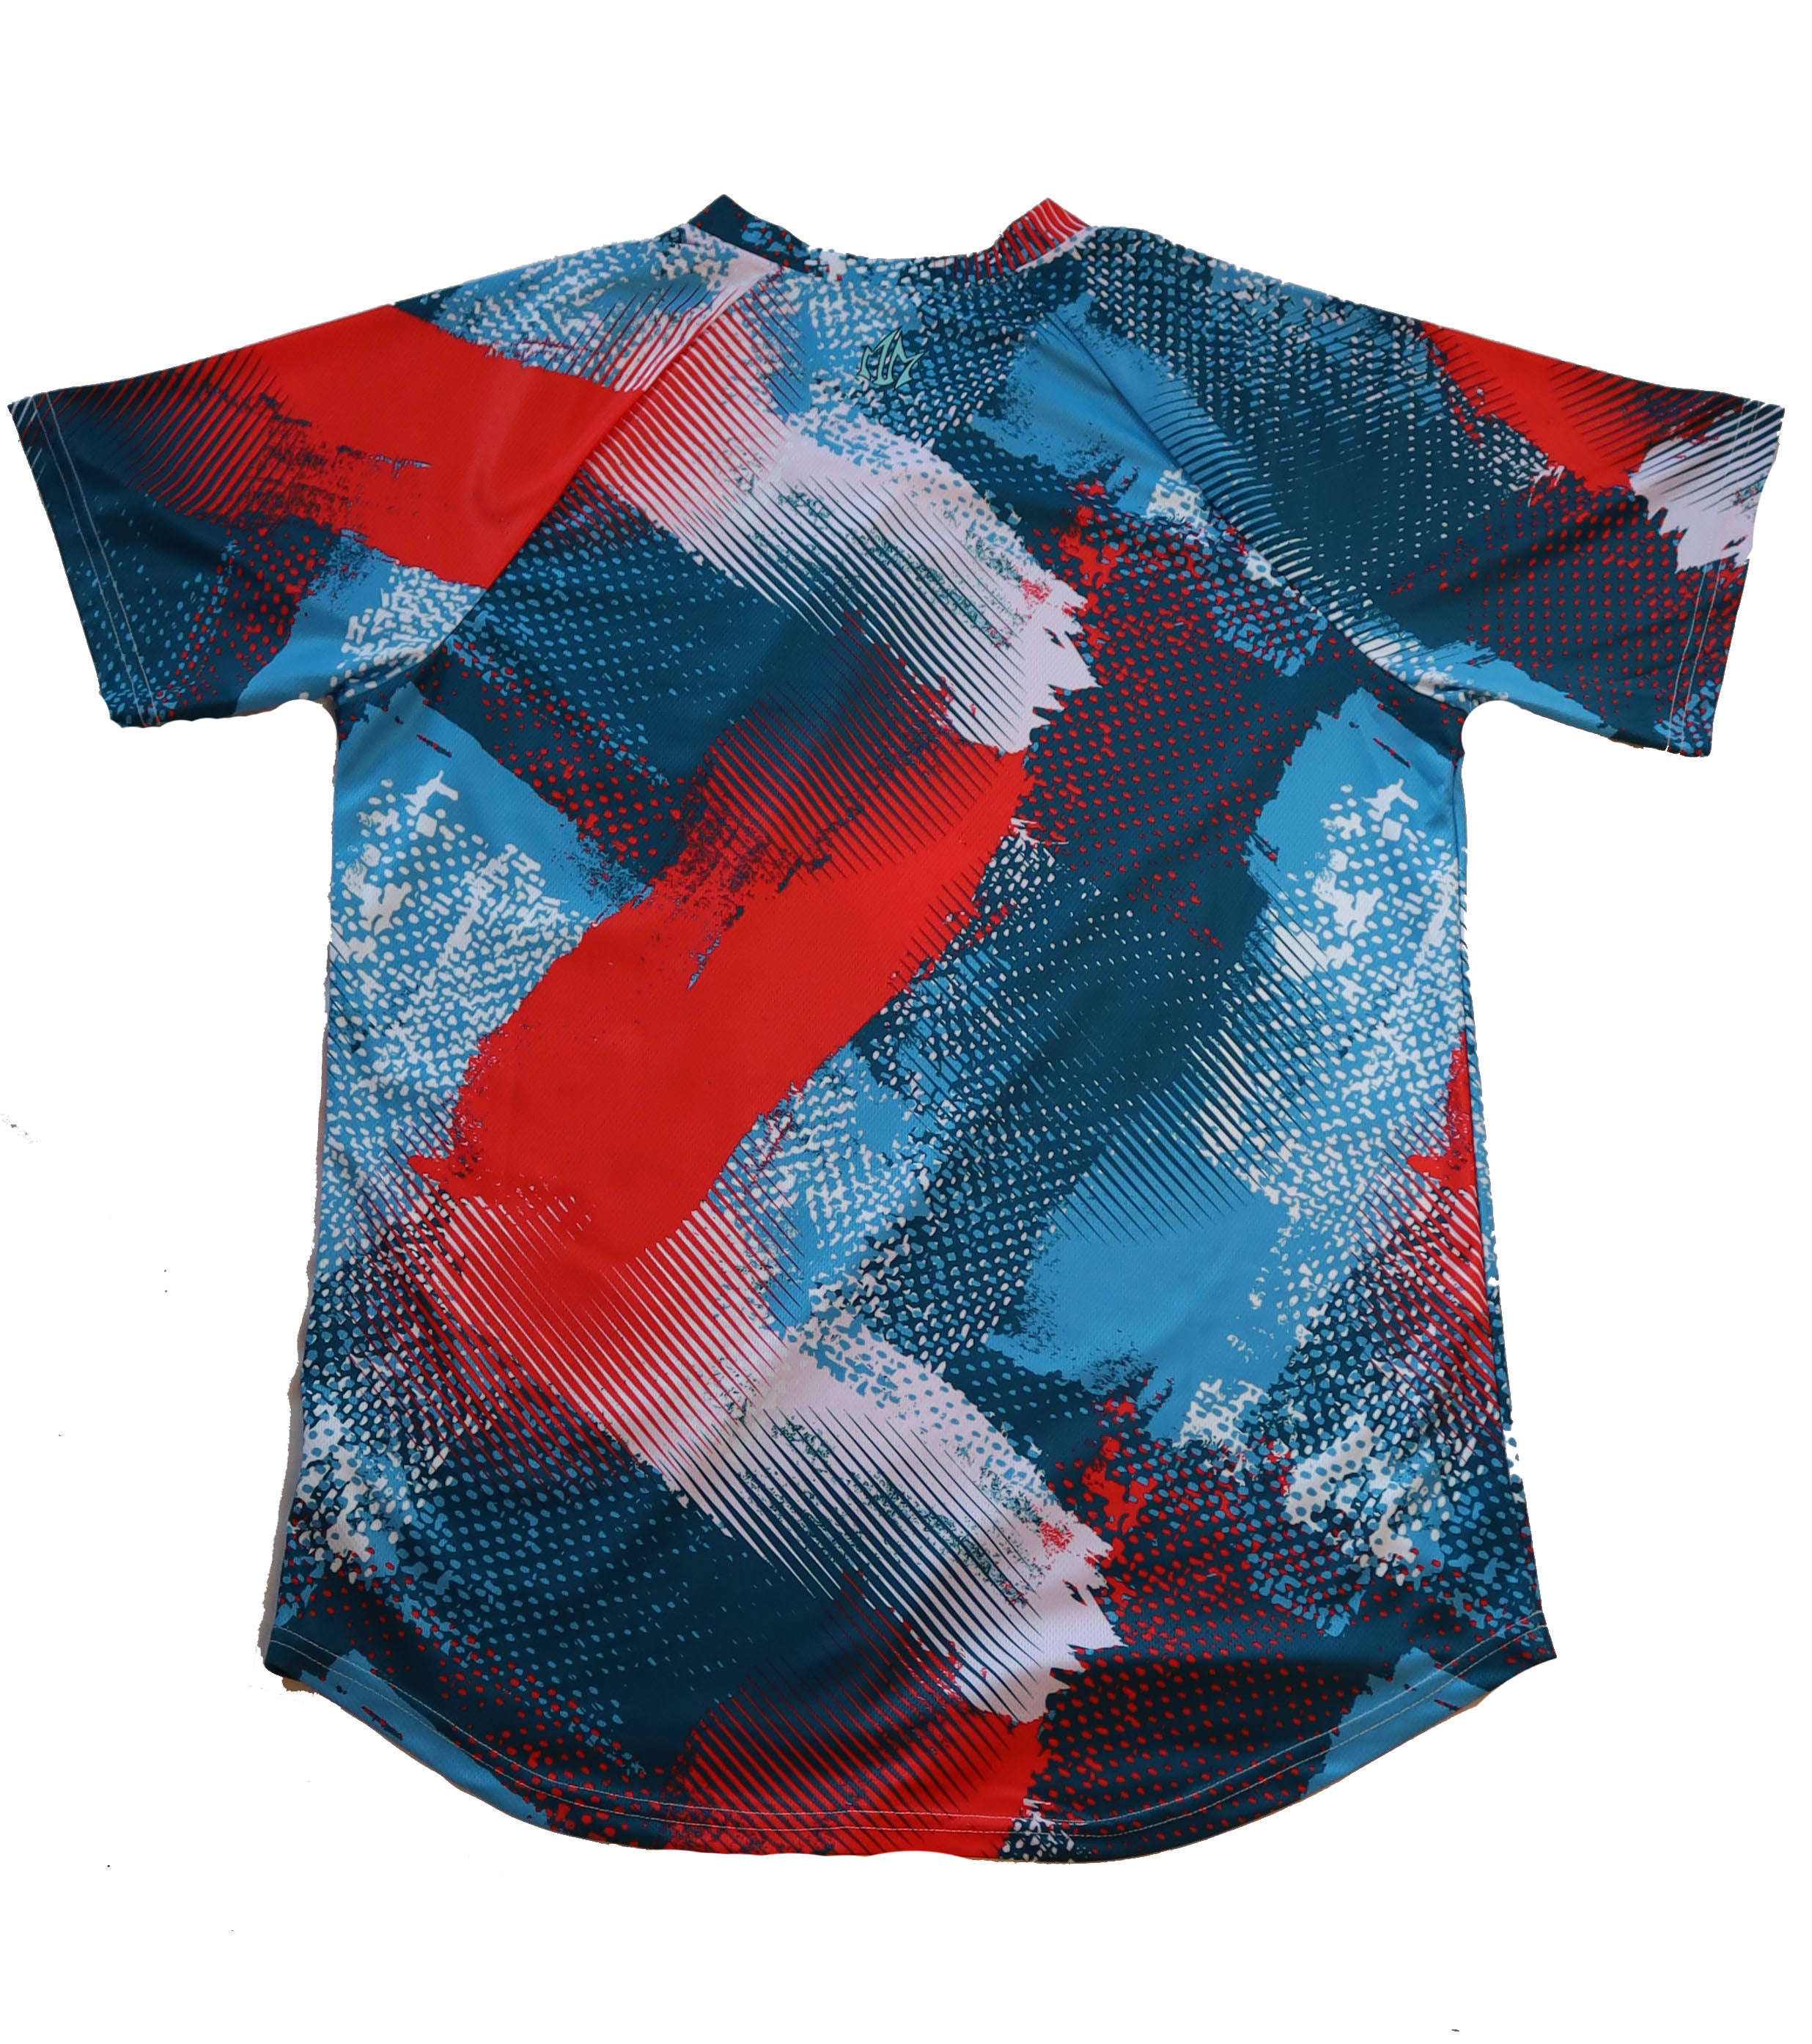 Motion Maker Moisture Management Tee (Homme) - Camo Red